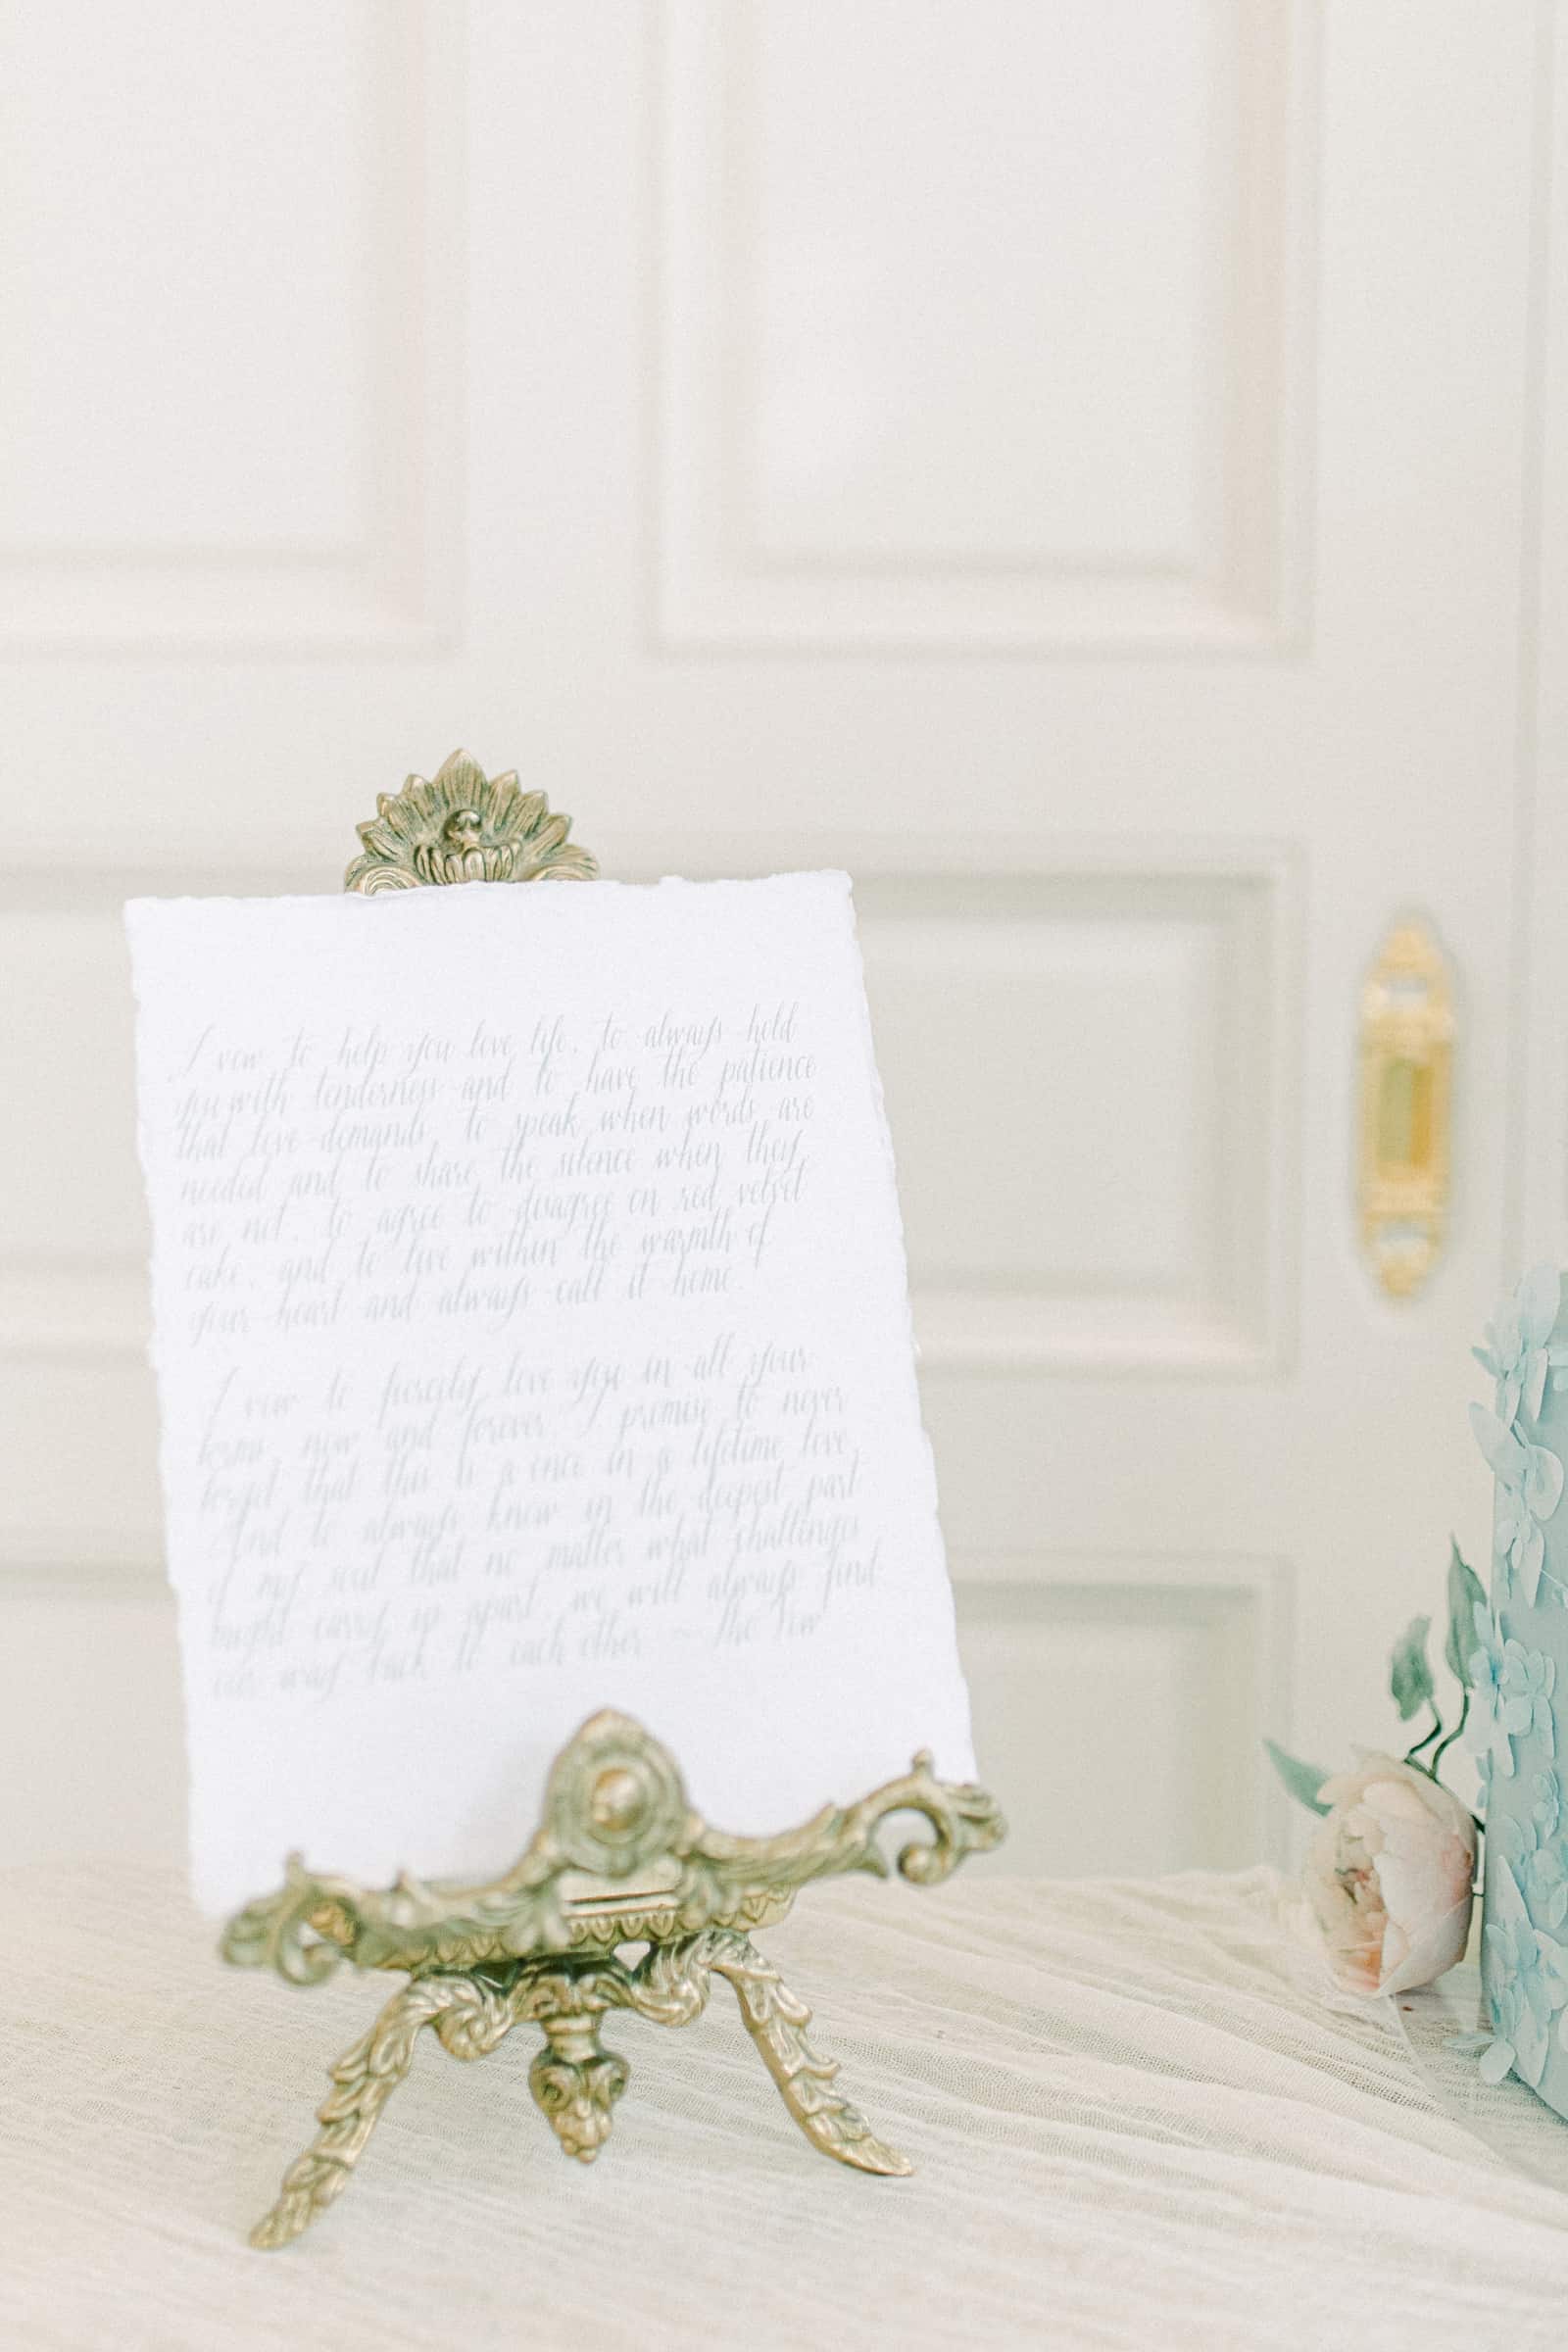 Wedding calligraphy bride and groom vows, personalized wedding details